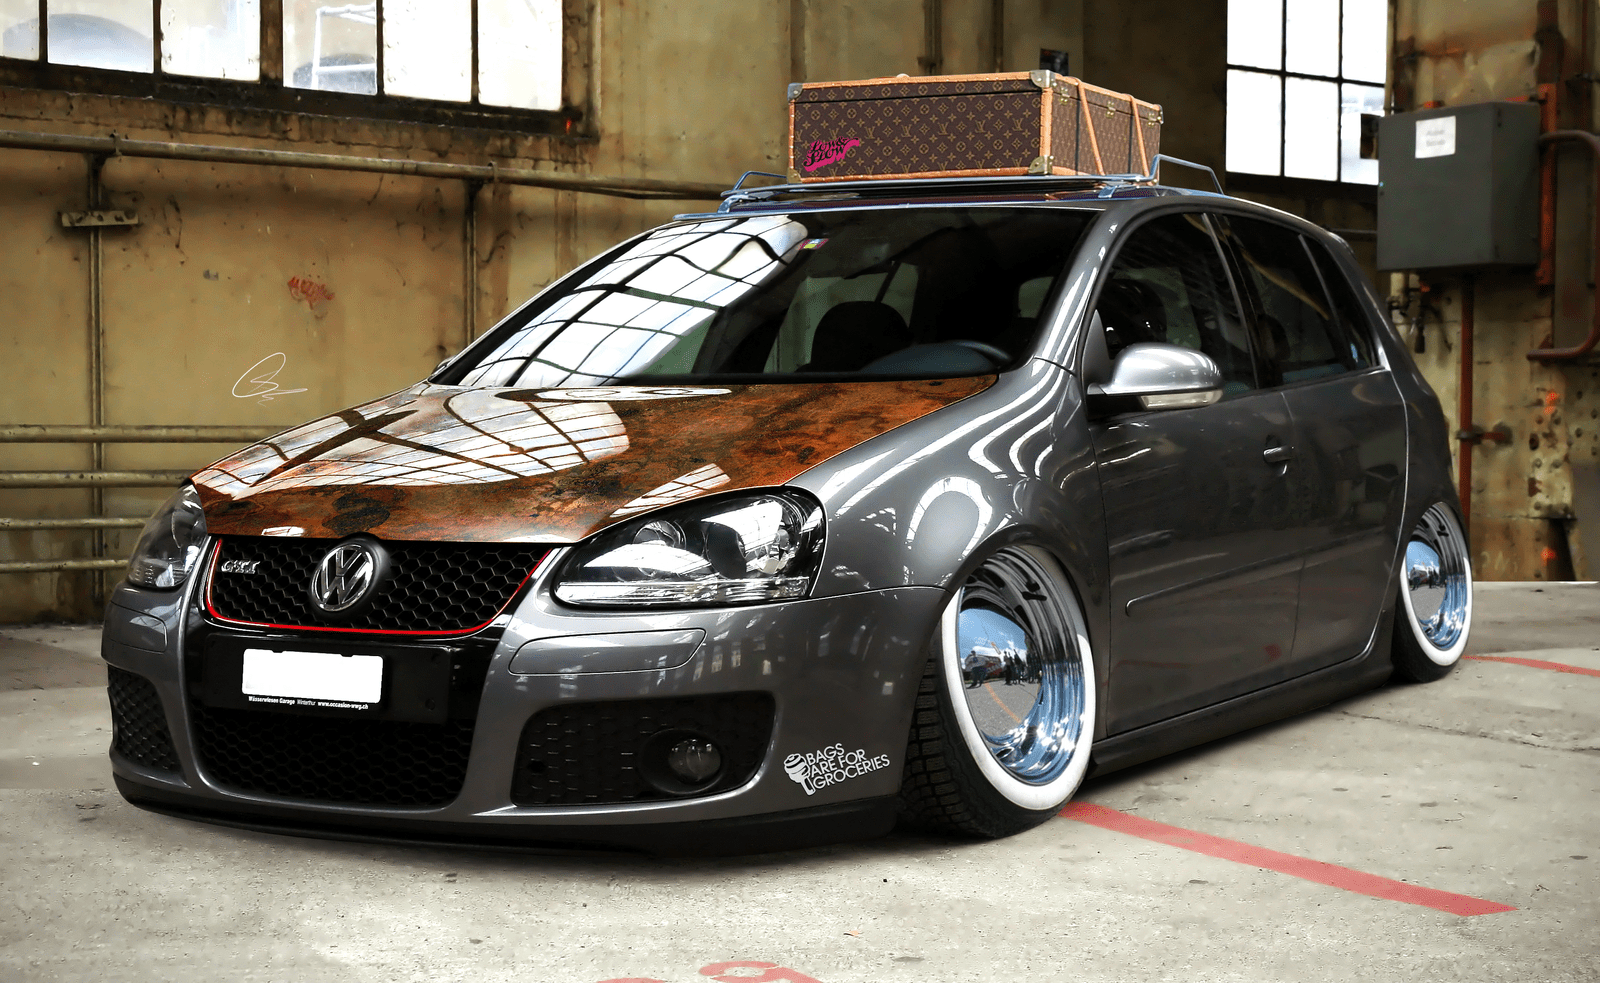 Bagged_Vw_Golf_Gti_by_JackinaboxDesign.png